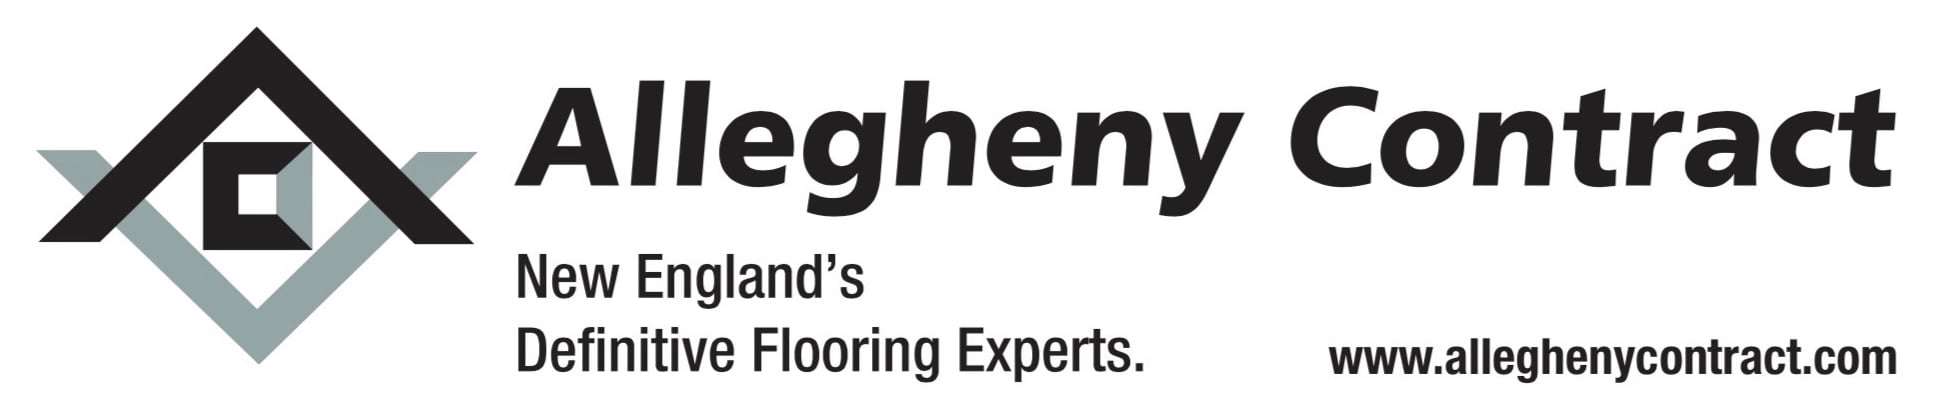 Result Image Allegheny Contract Flooring